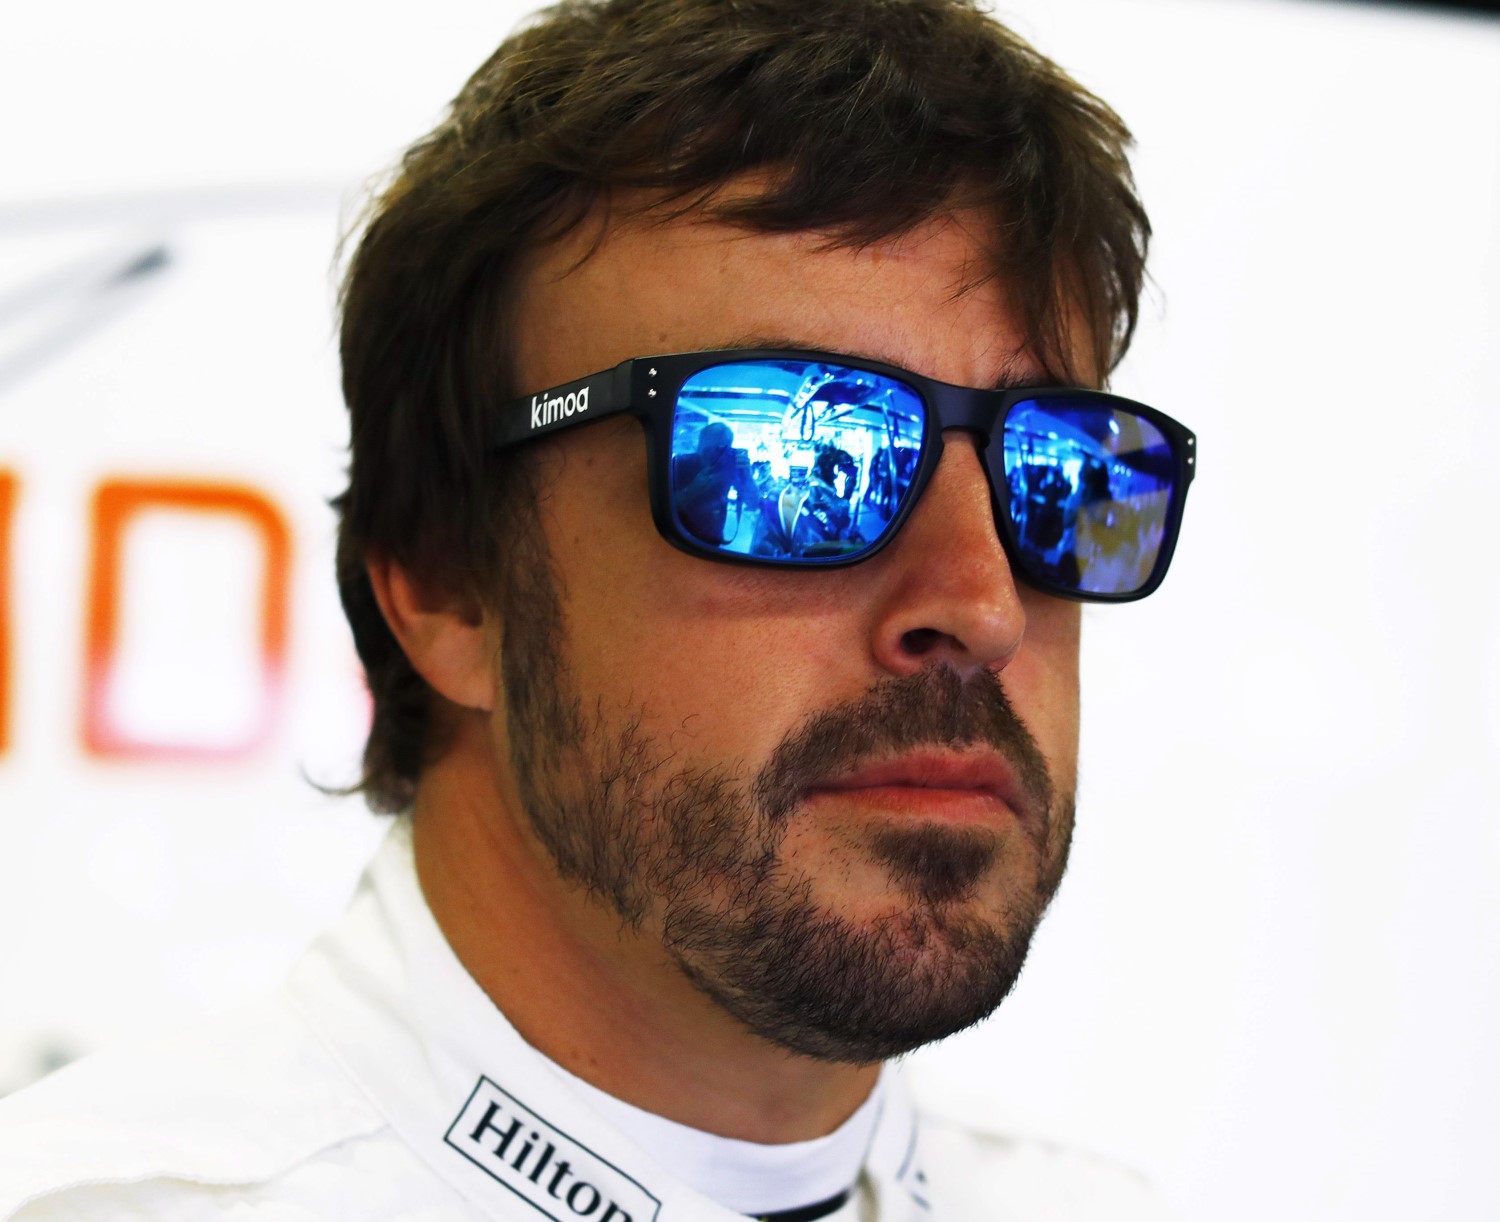 Will Alonso be Hamilton's teammate in 2018?